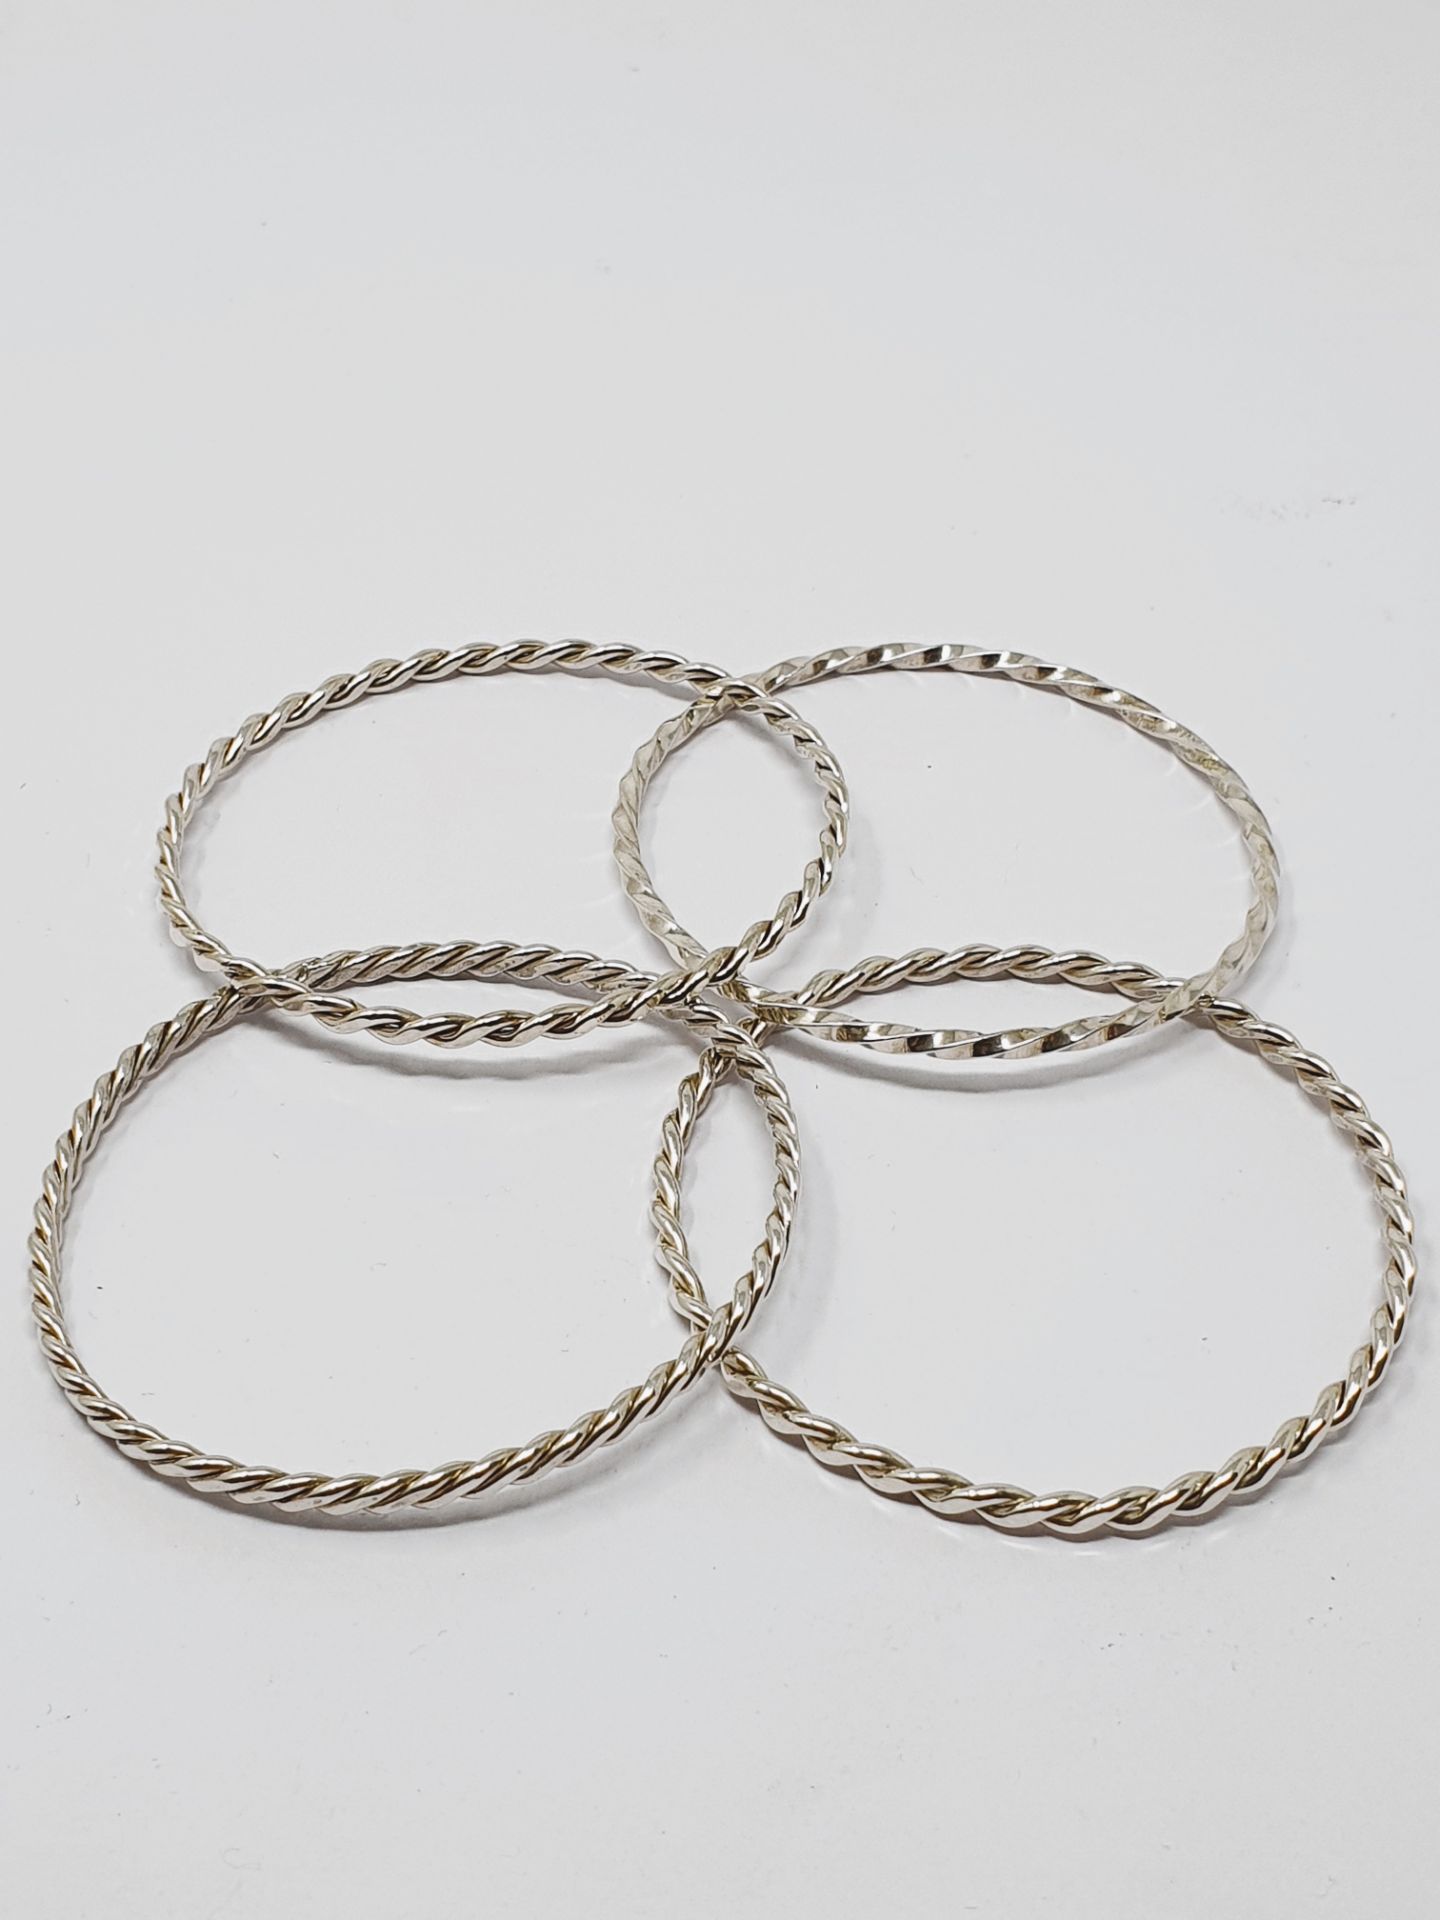 Four twisted, solid wire bracelets stamped 'STERLING', gross weight 48.